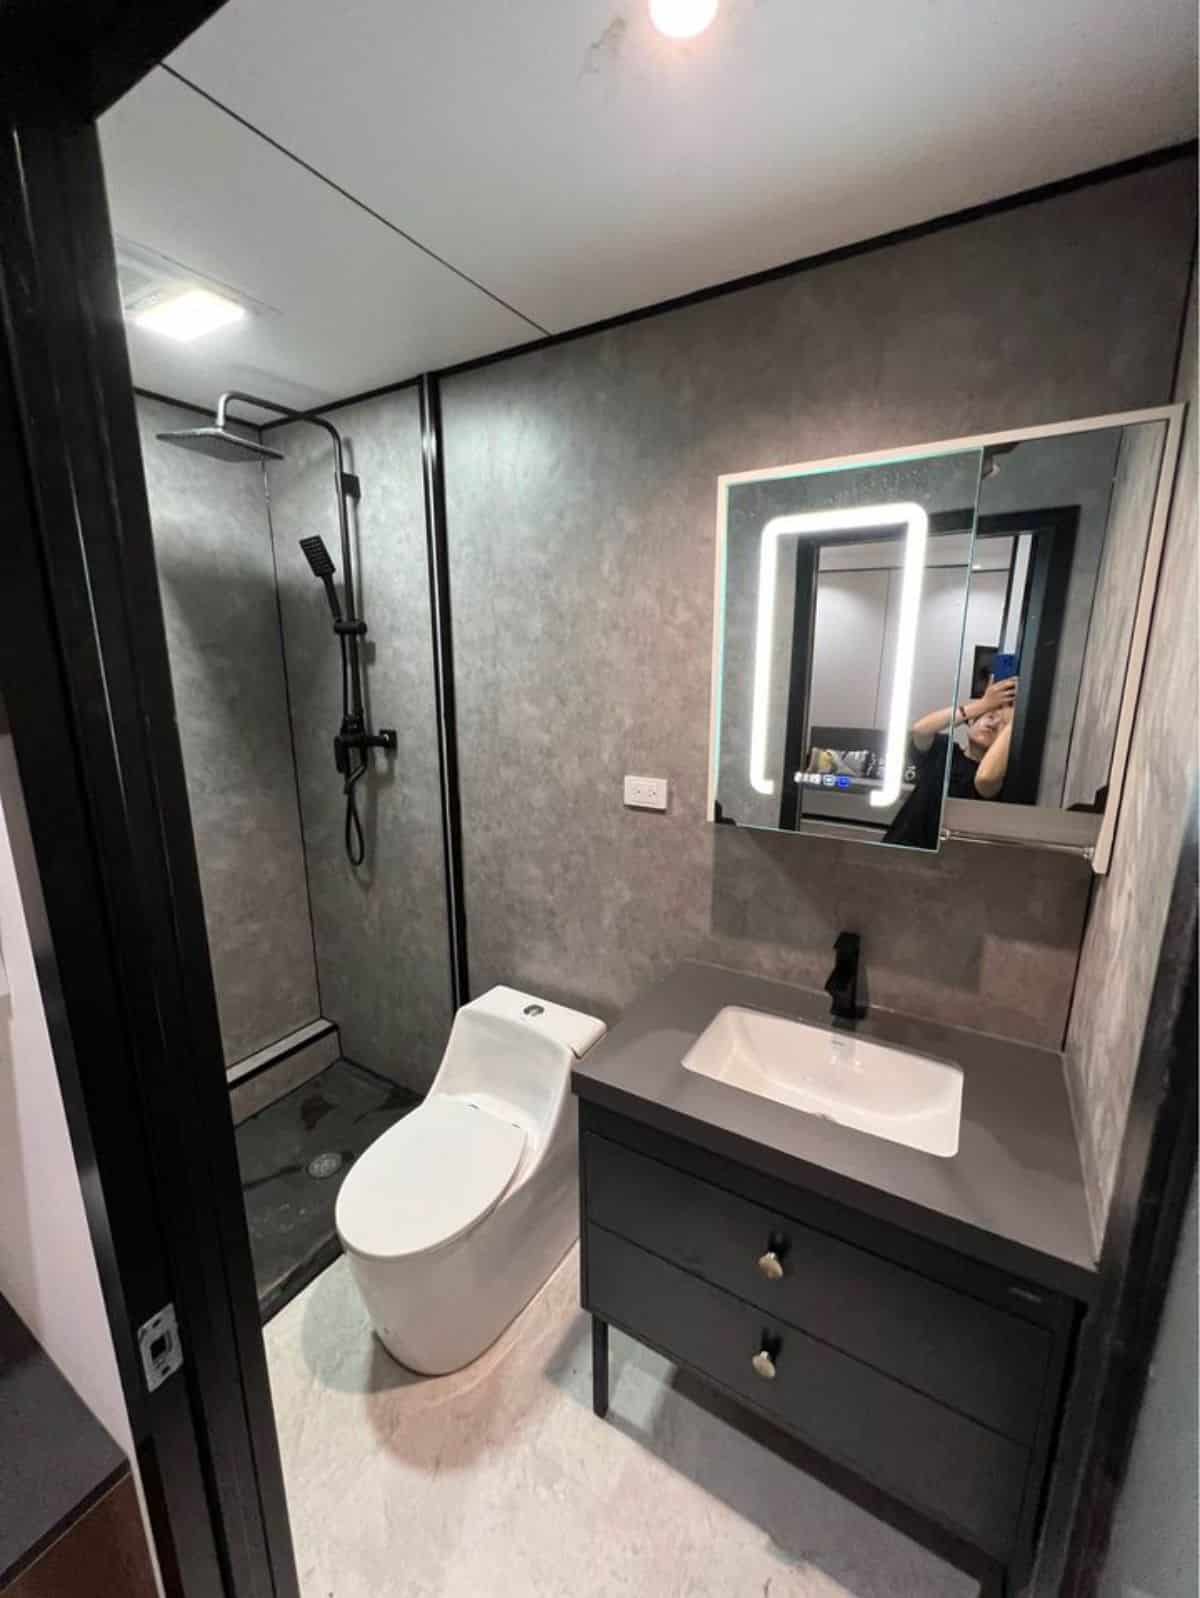 bathroom of tiny house with a slide is just stunning with standard toilet, sink with vanity and separate shower area